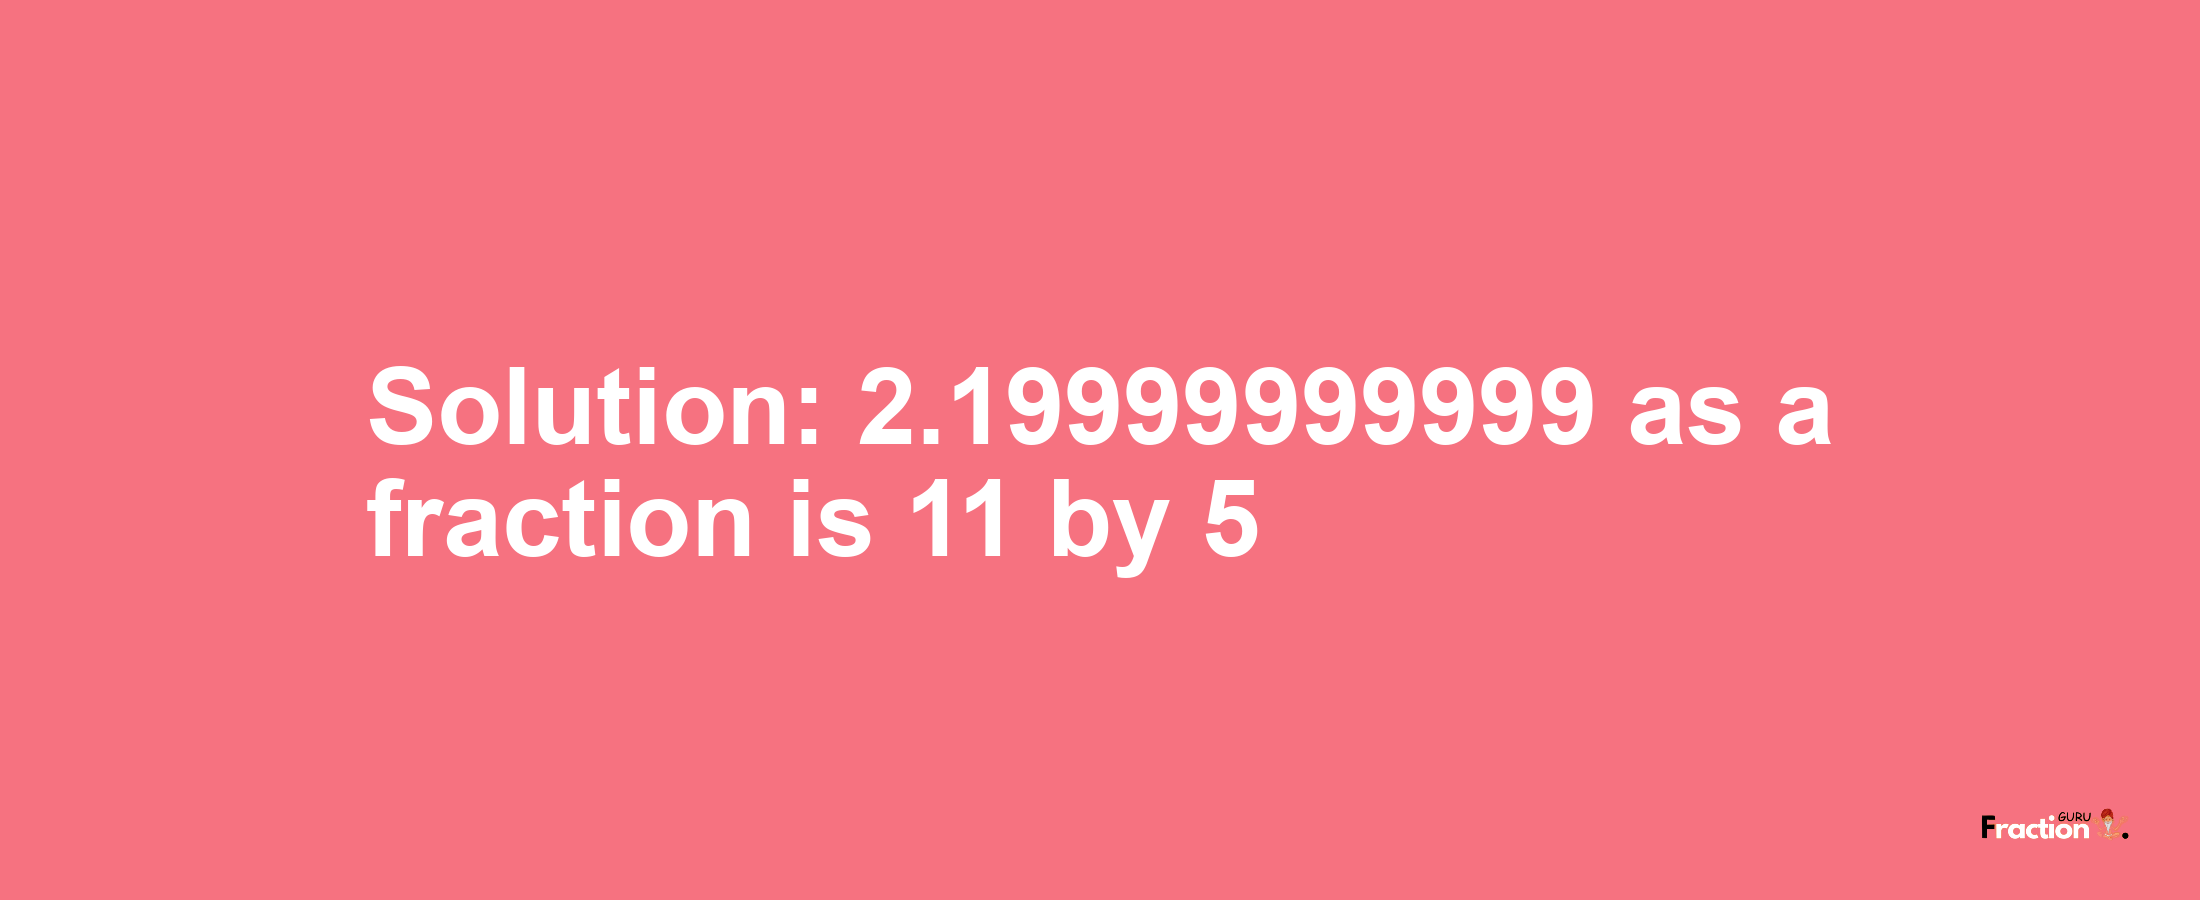 Solution:2.19999999999 as a fraction is 11/5